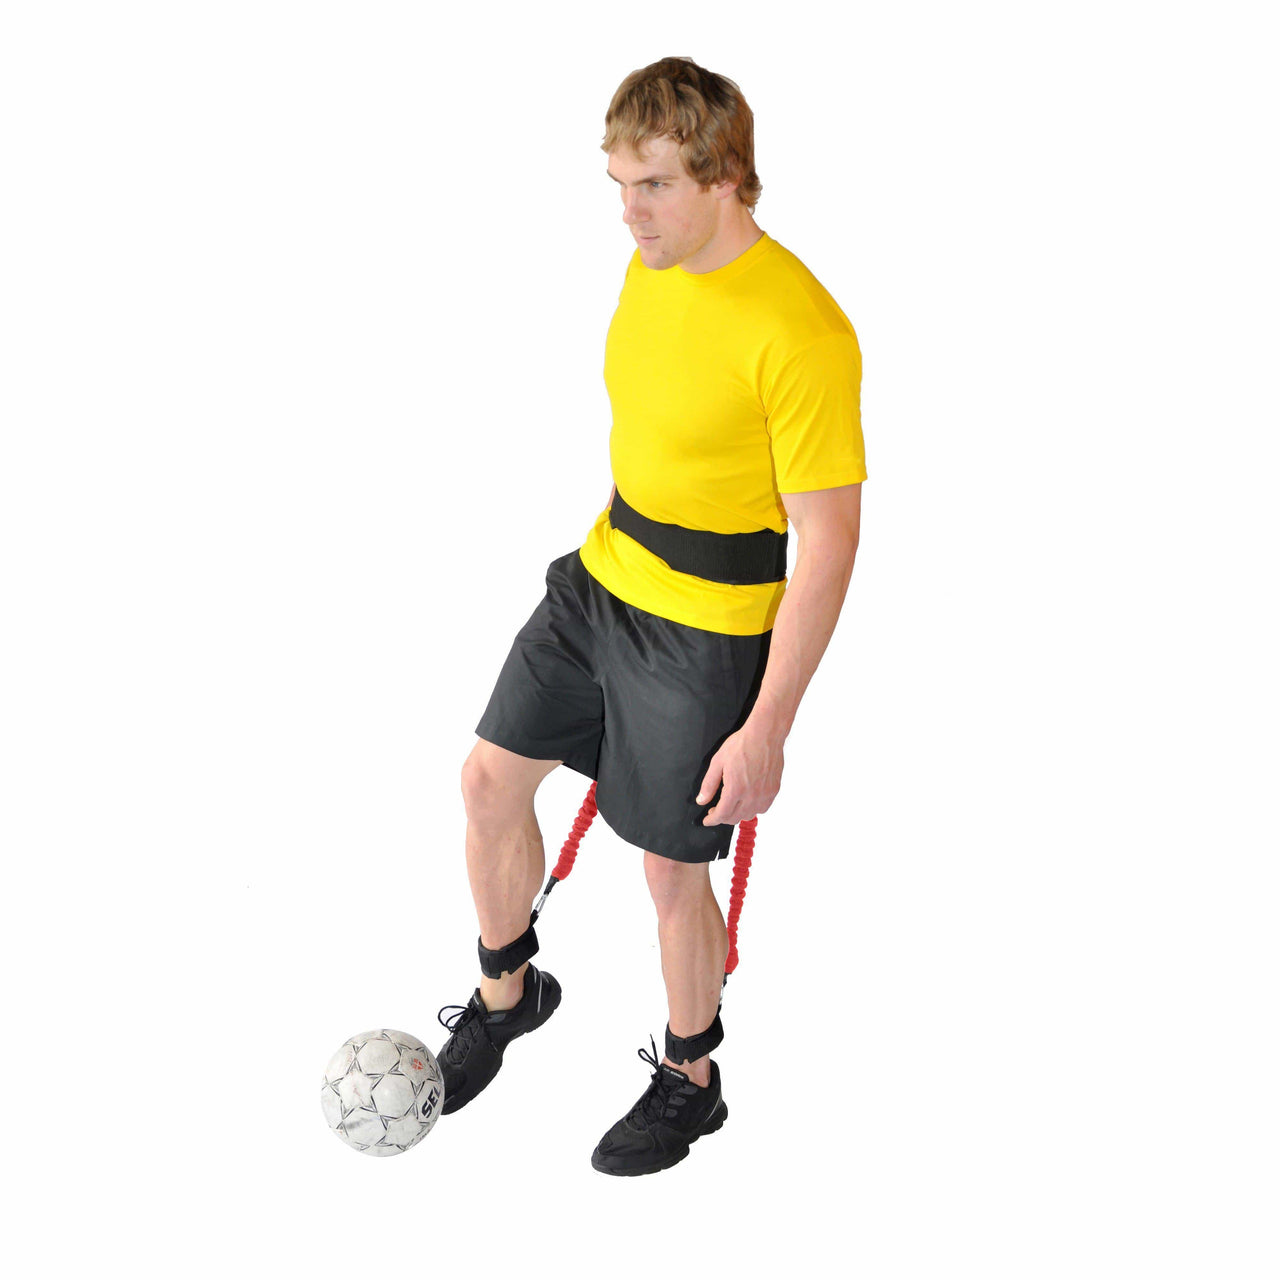 Resistance training for soccer players to increase leg strength for harder kicks and longer passes. Use this system to increase your athletes leg strength when kicking a soccer ball. for coaches, individual players, soccer moms and training organizations